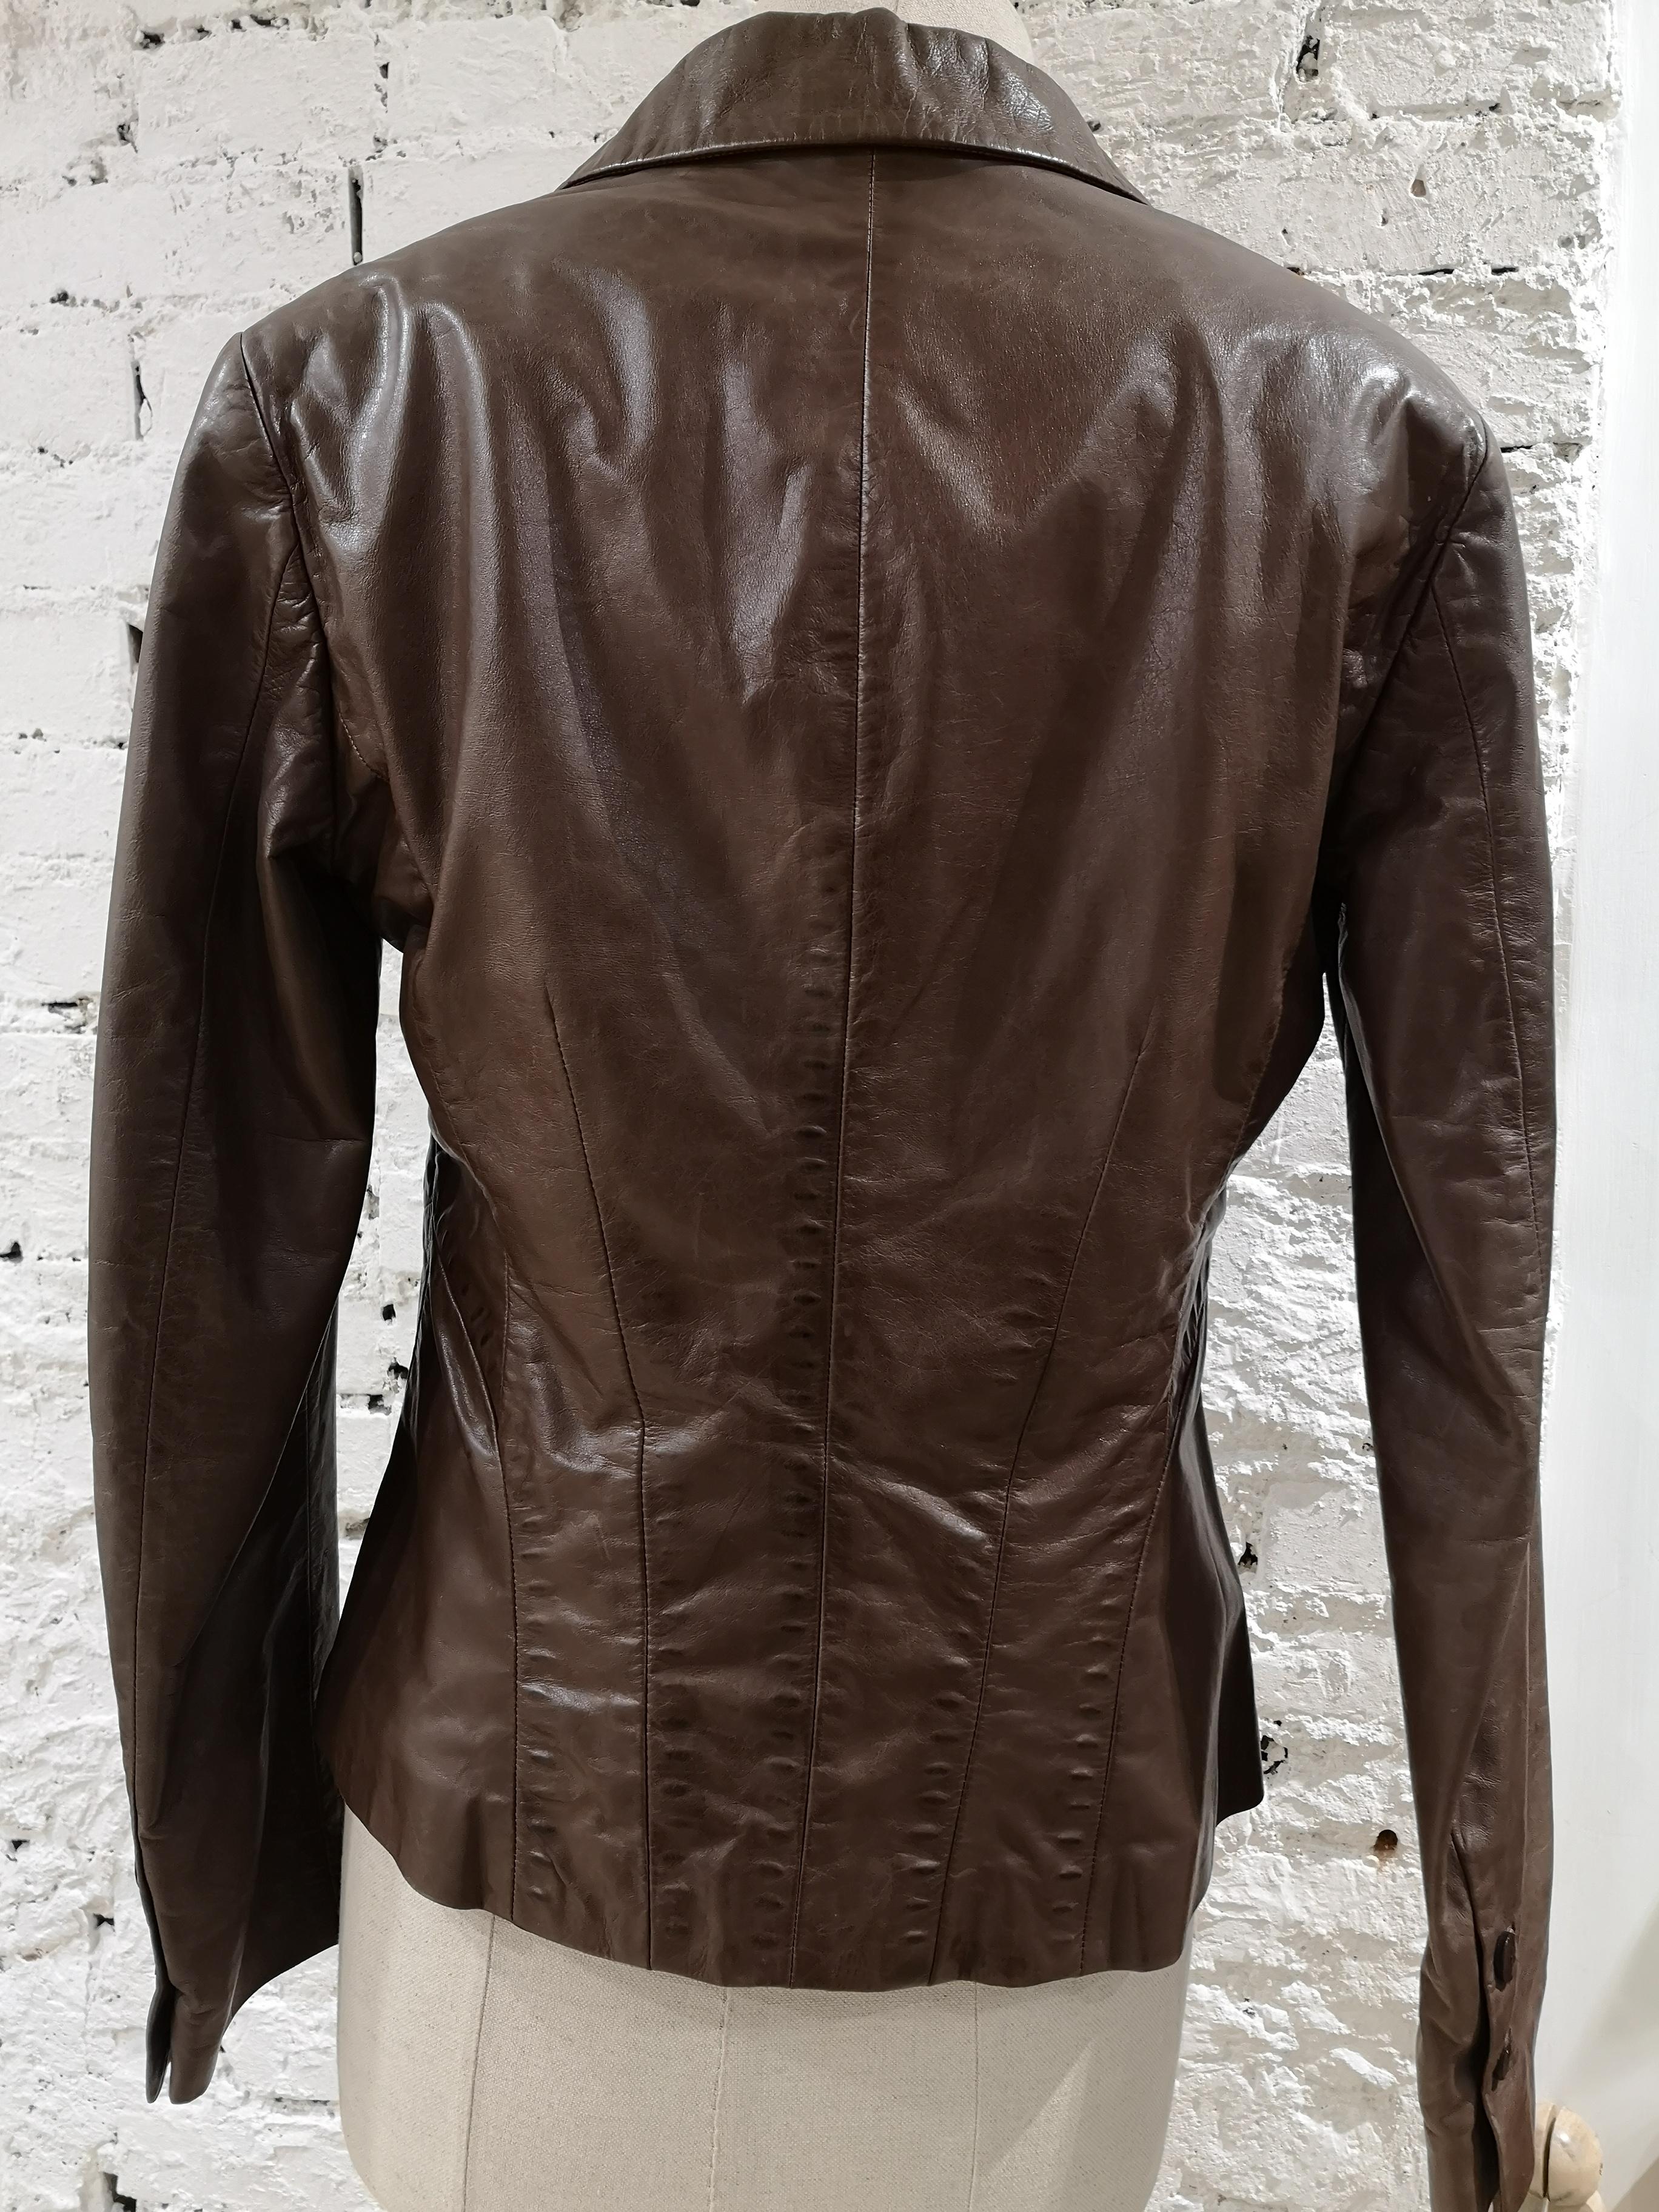 rebel by rino & pelle leather jacket